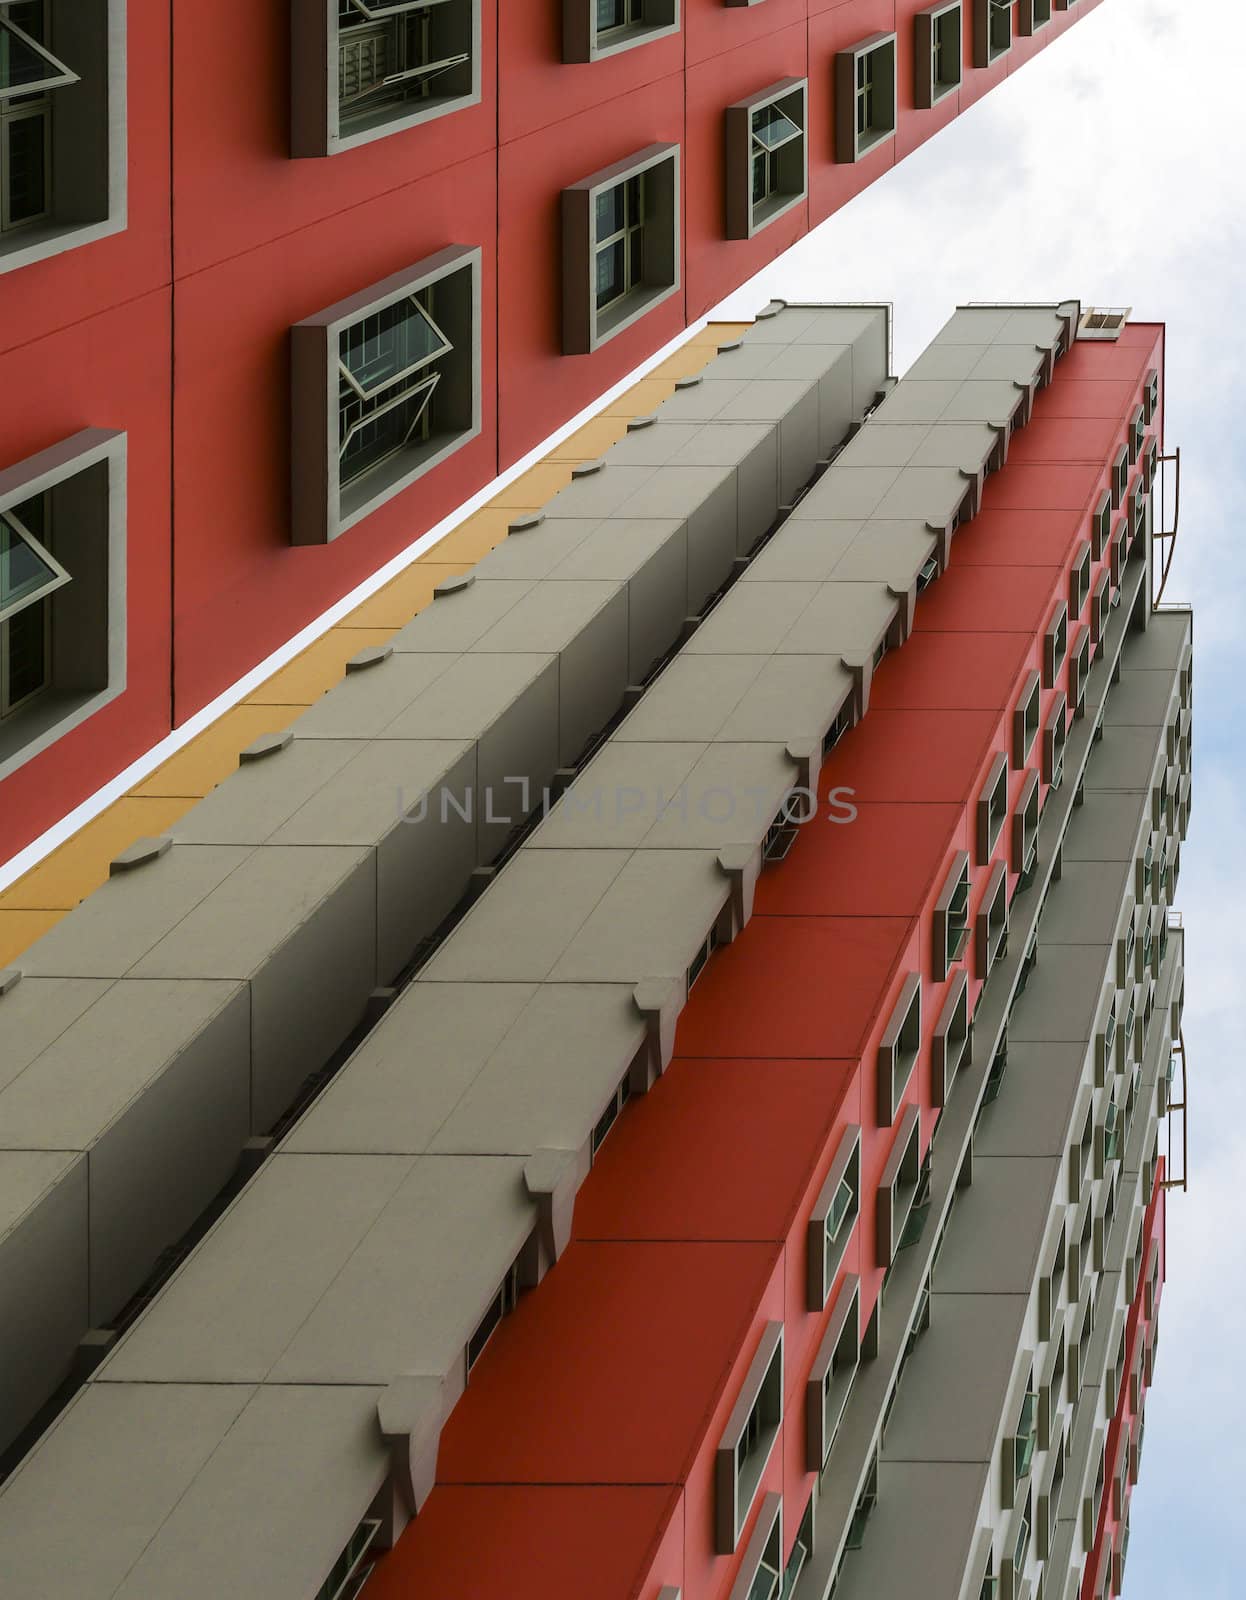 A low angle shot of a new colorful high rise apartment against the sky.